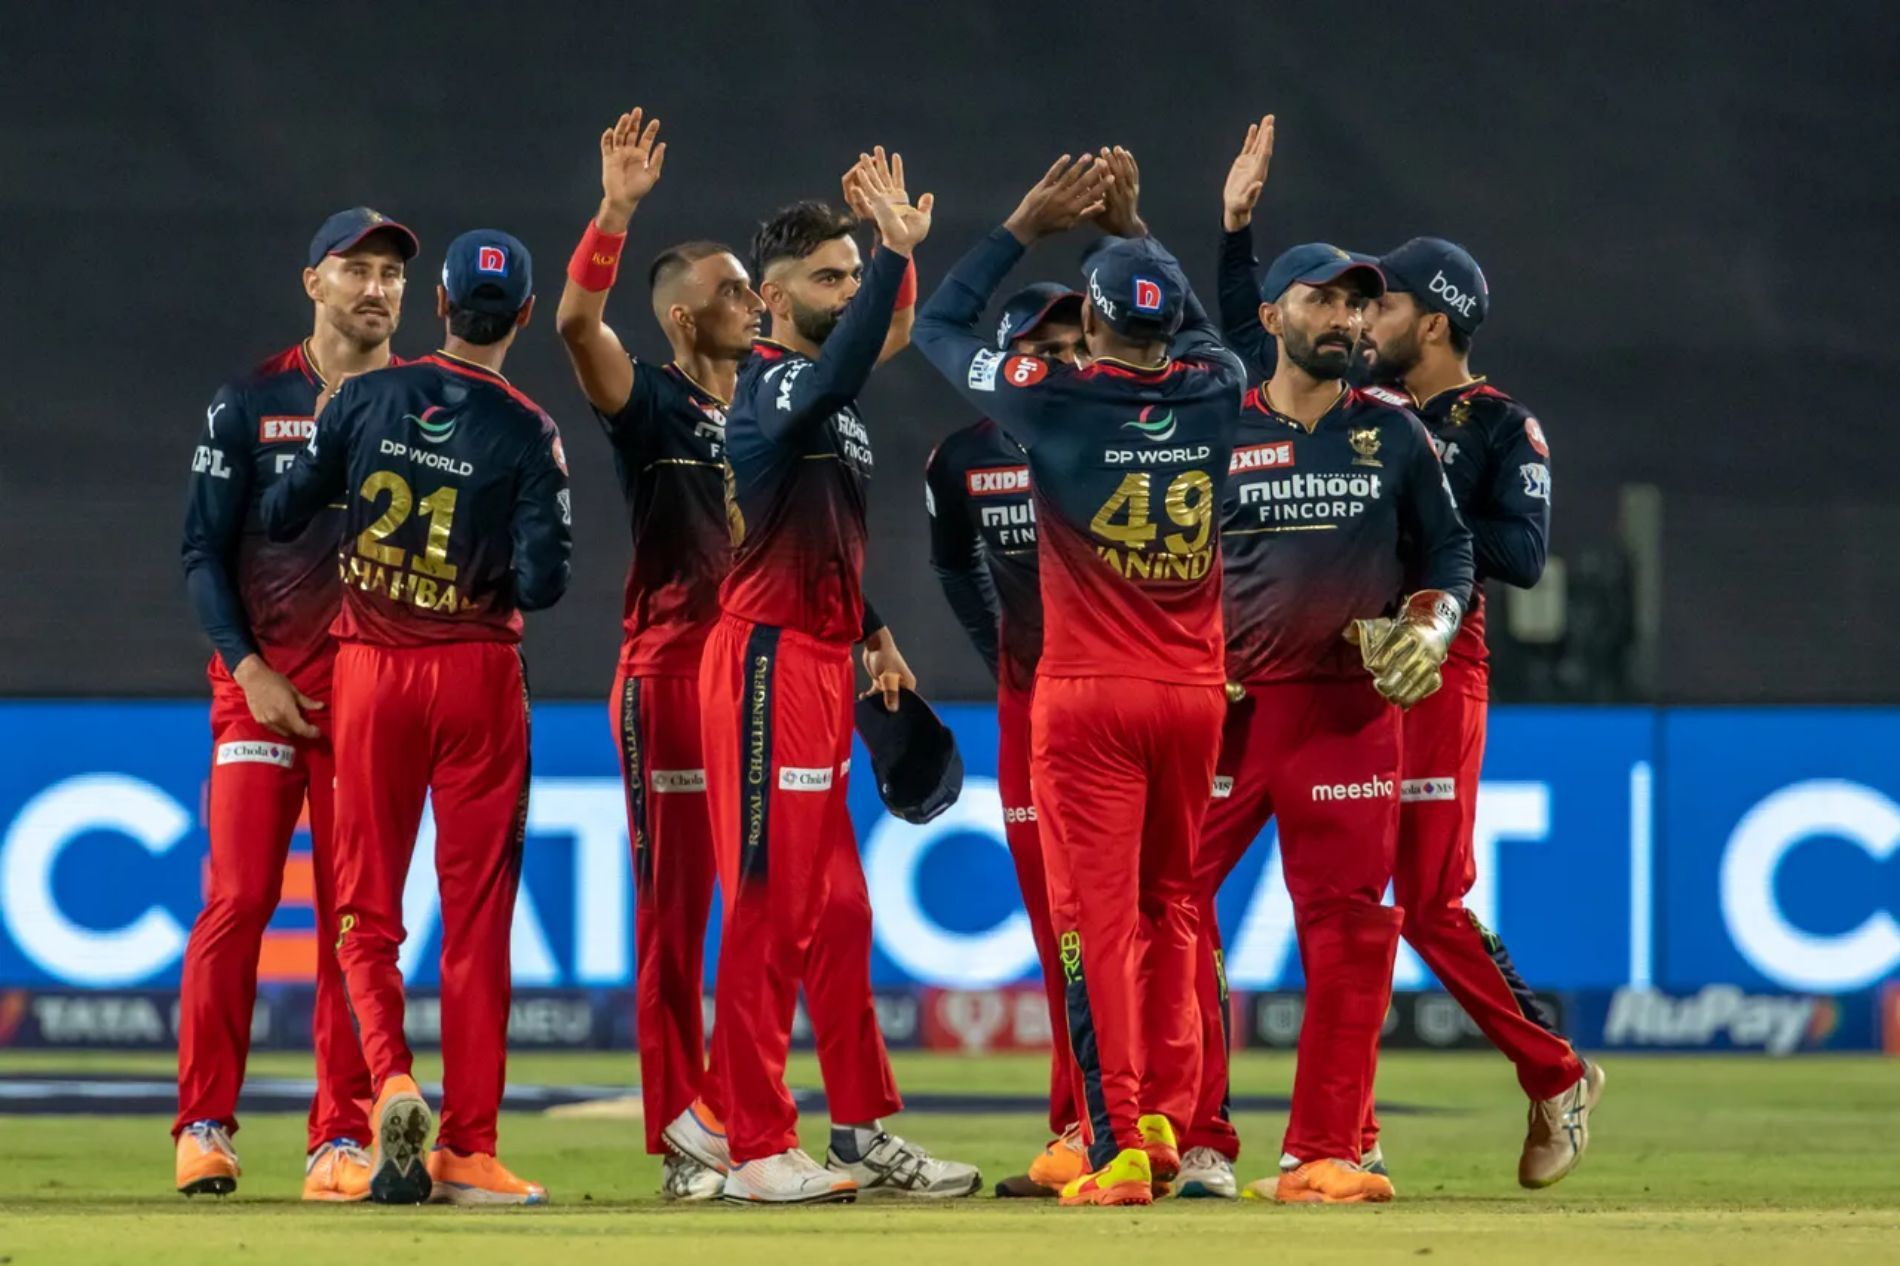 RCB players celebrate a wicket in IPL 2022. Pic: BCCI